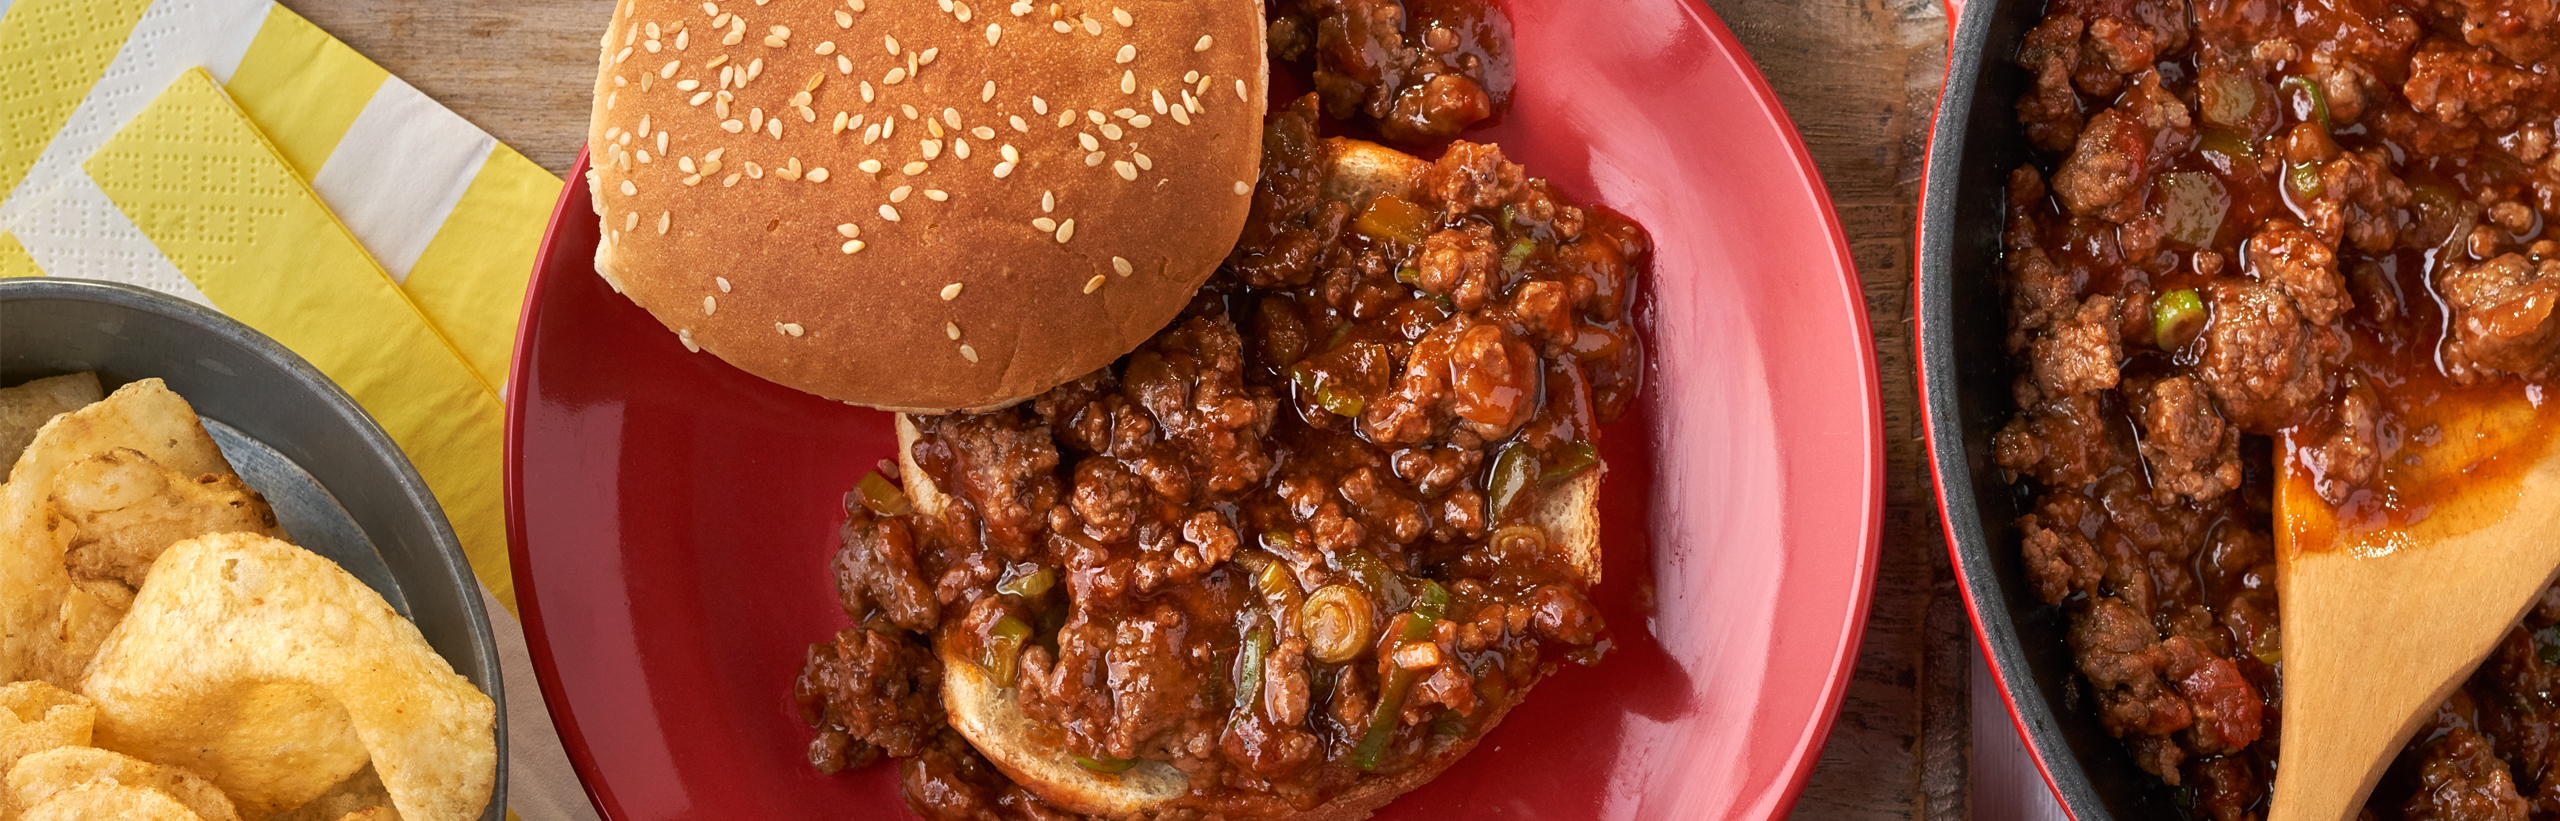 Picante Sloppy Joes